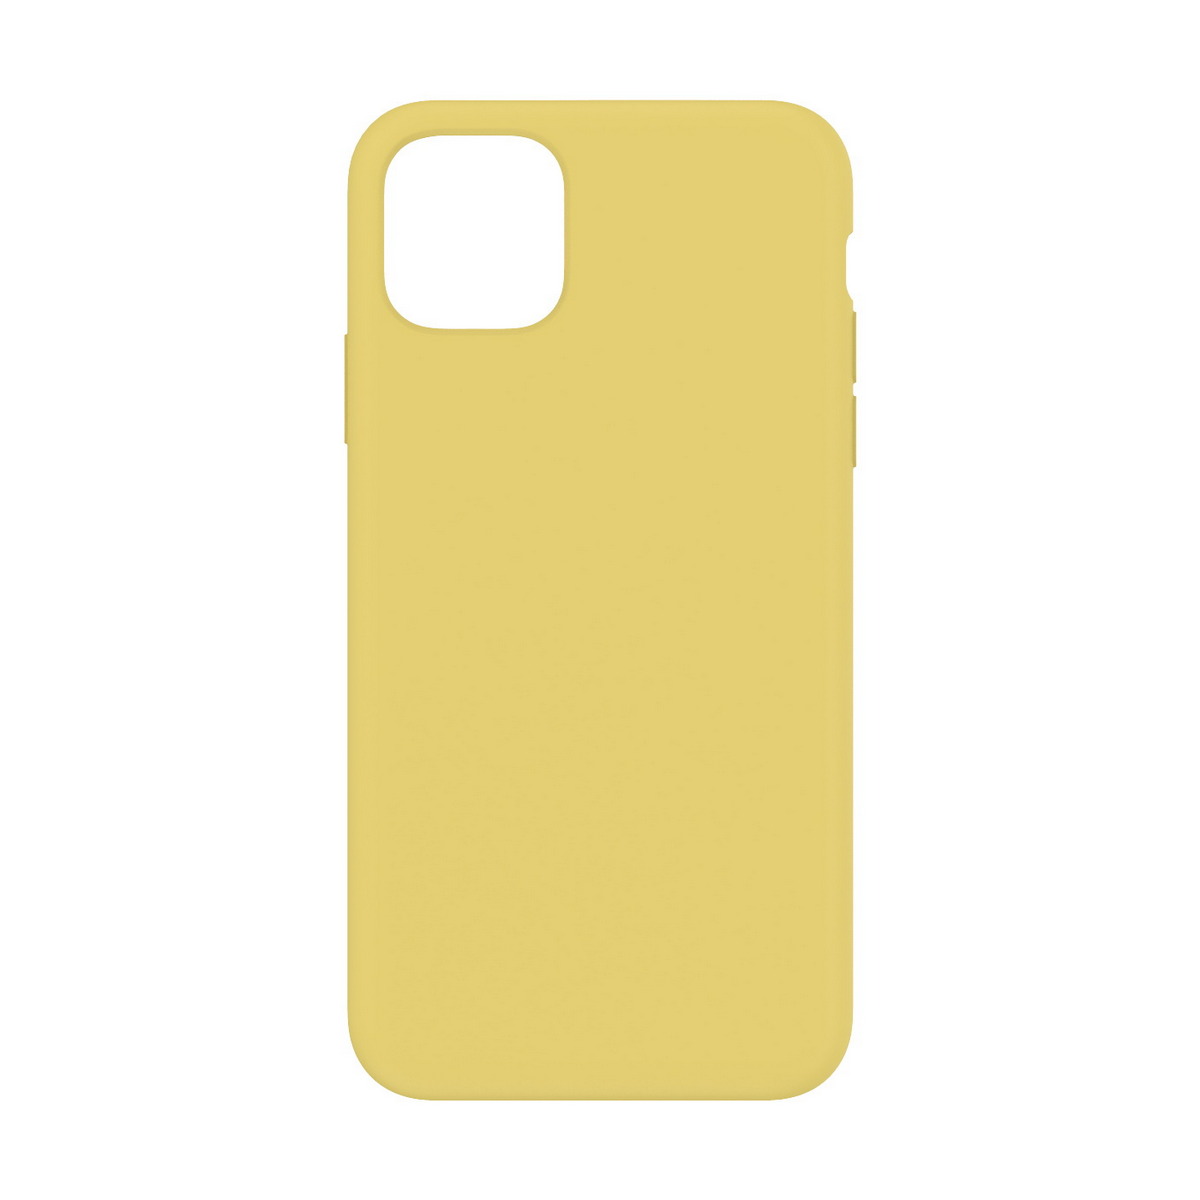 HEAL Case for iPhone 11 (Yellow) Case Silicone